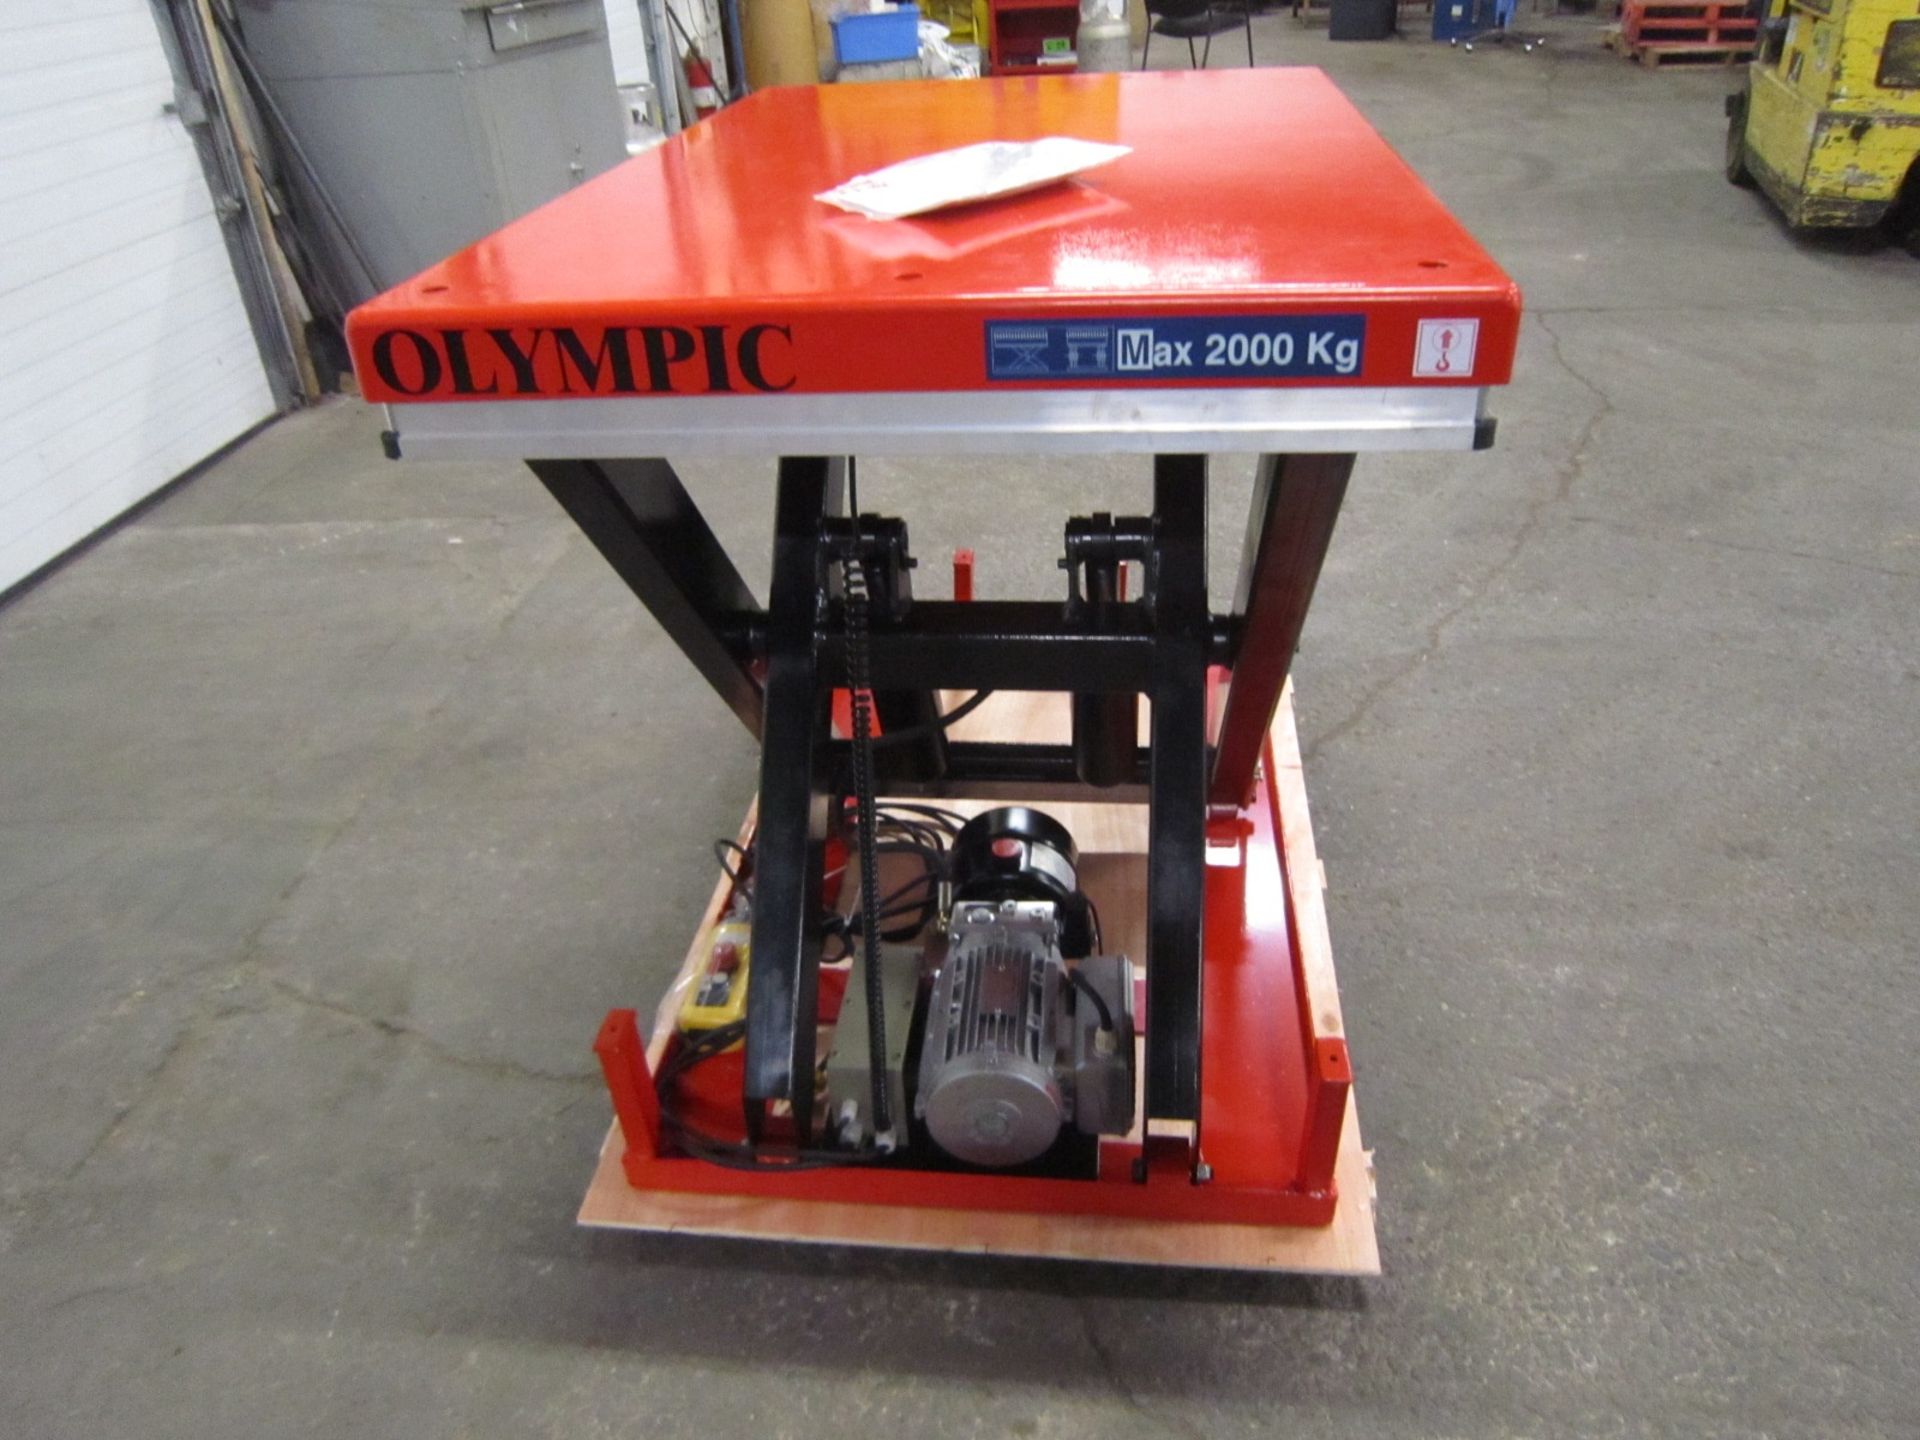 Olympic Hydraulic Lift Table 32" x 52" x 40" lift - 4000lbs capacity - UNUSED and MINT - 115V - Image 2 of 2